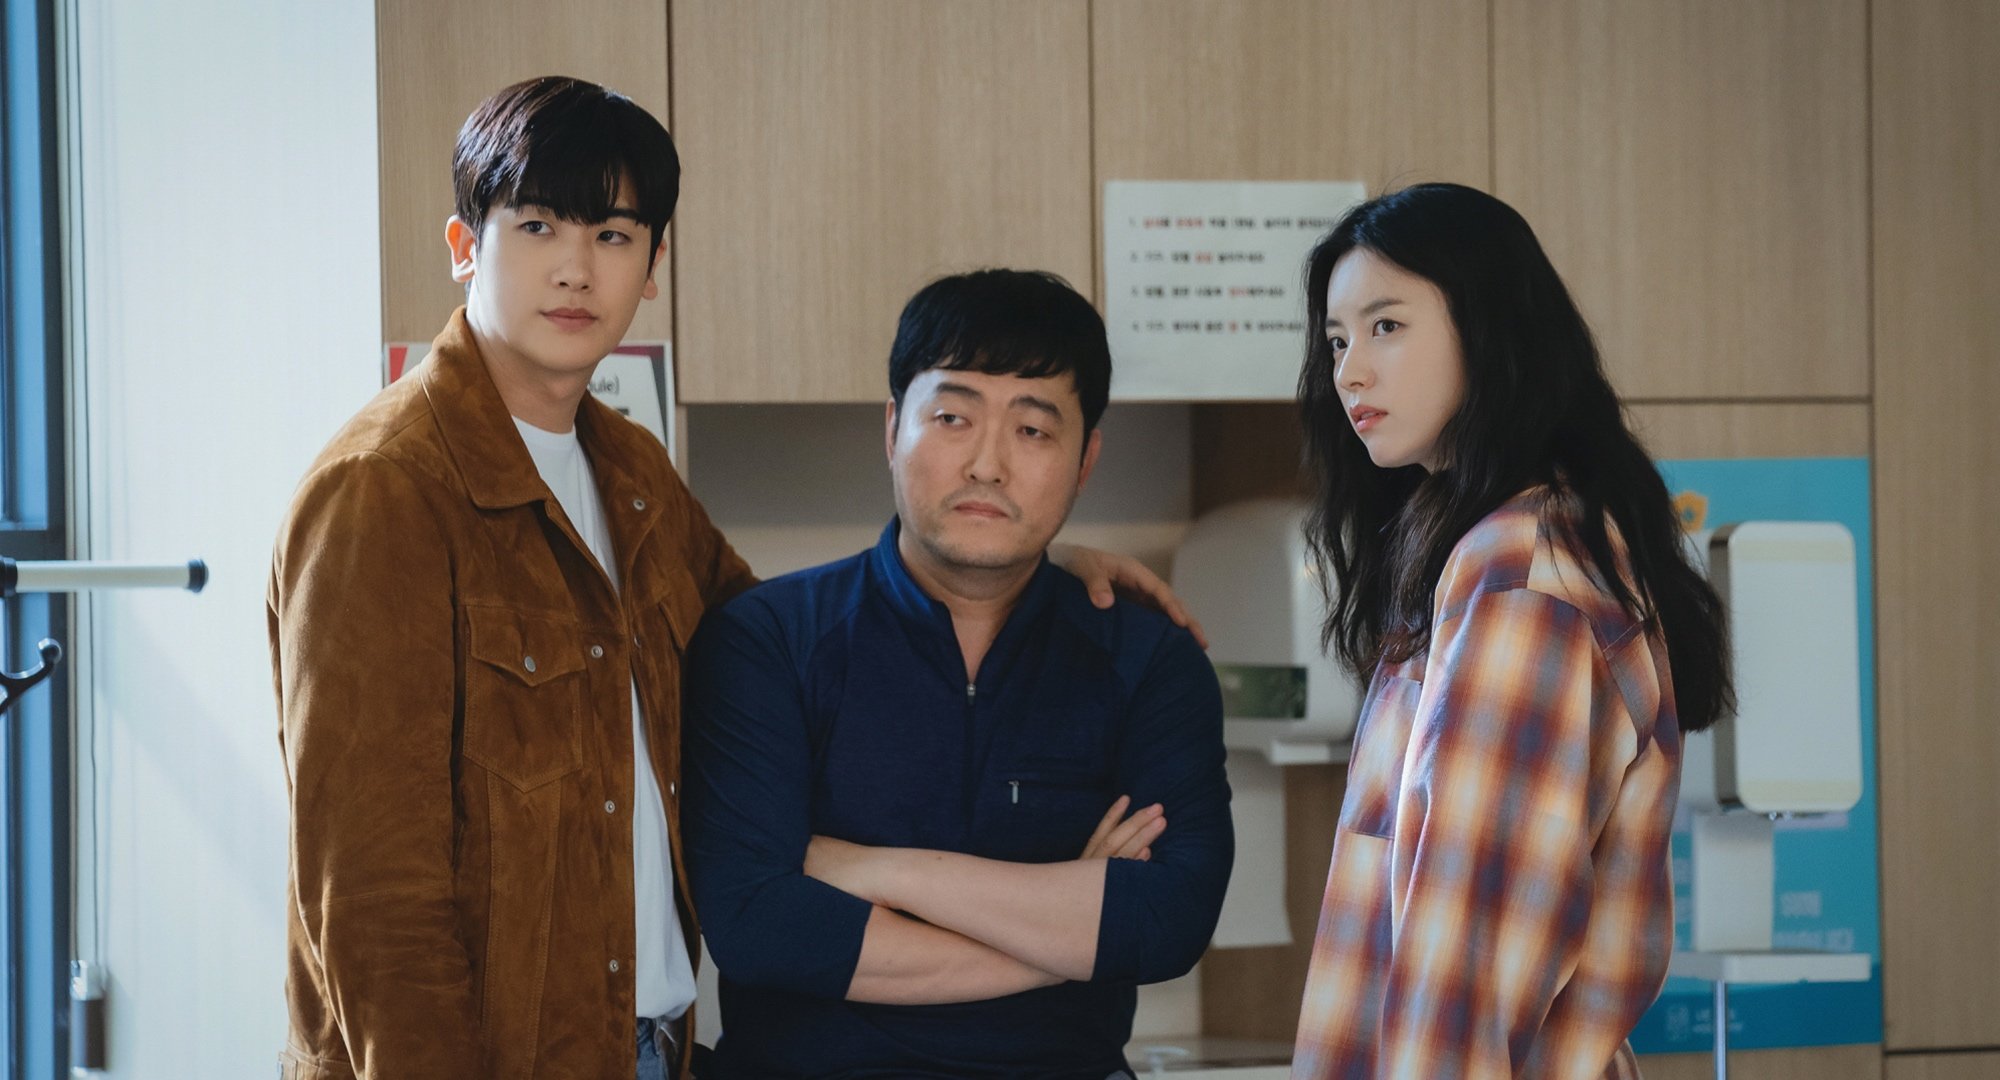 Main characters for 'Happiness' episode 4 K-drama huddled together staring at someone.